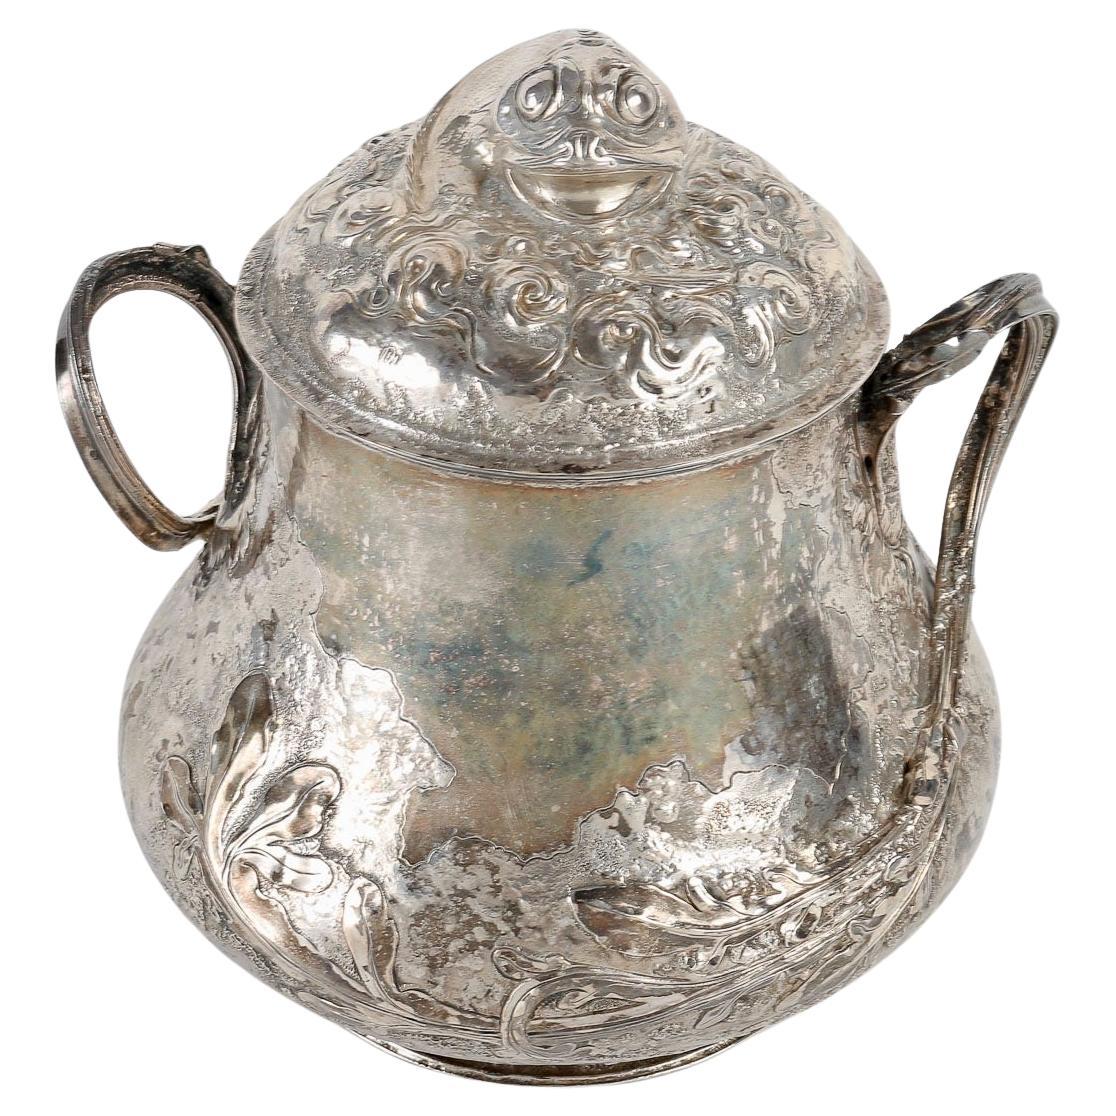 Henri HUSSON (1852 - 1914)
 An Art Nouveau naturalistic silver sugar covered pot with decoration in light relief, silver projections and algae over the entire surface, flanked by two vegetative handles.
Lid adorned with a fantastic fish emerging